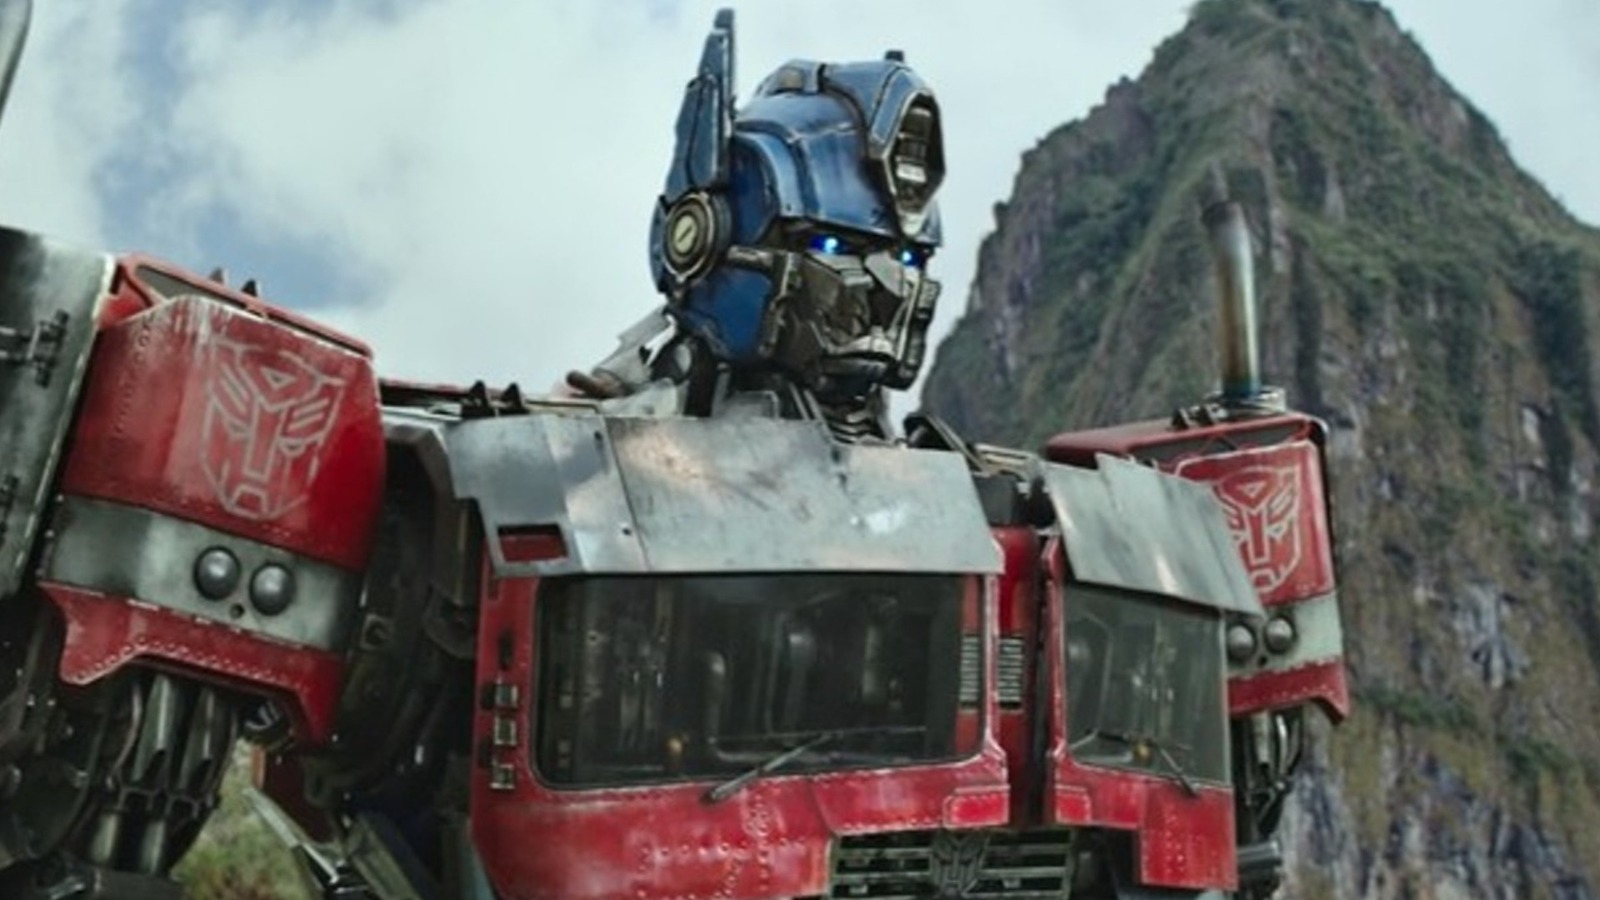 Transformers One Release Date, Cast, Plot, And More Details 247 News